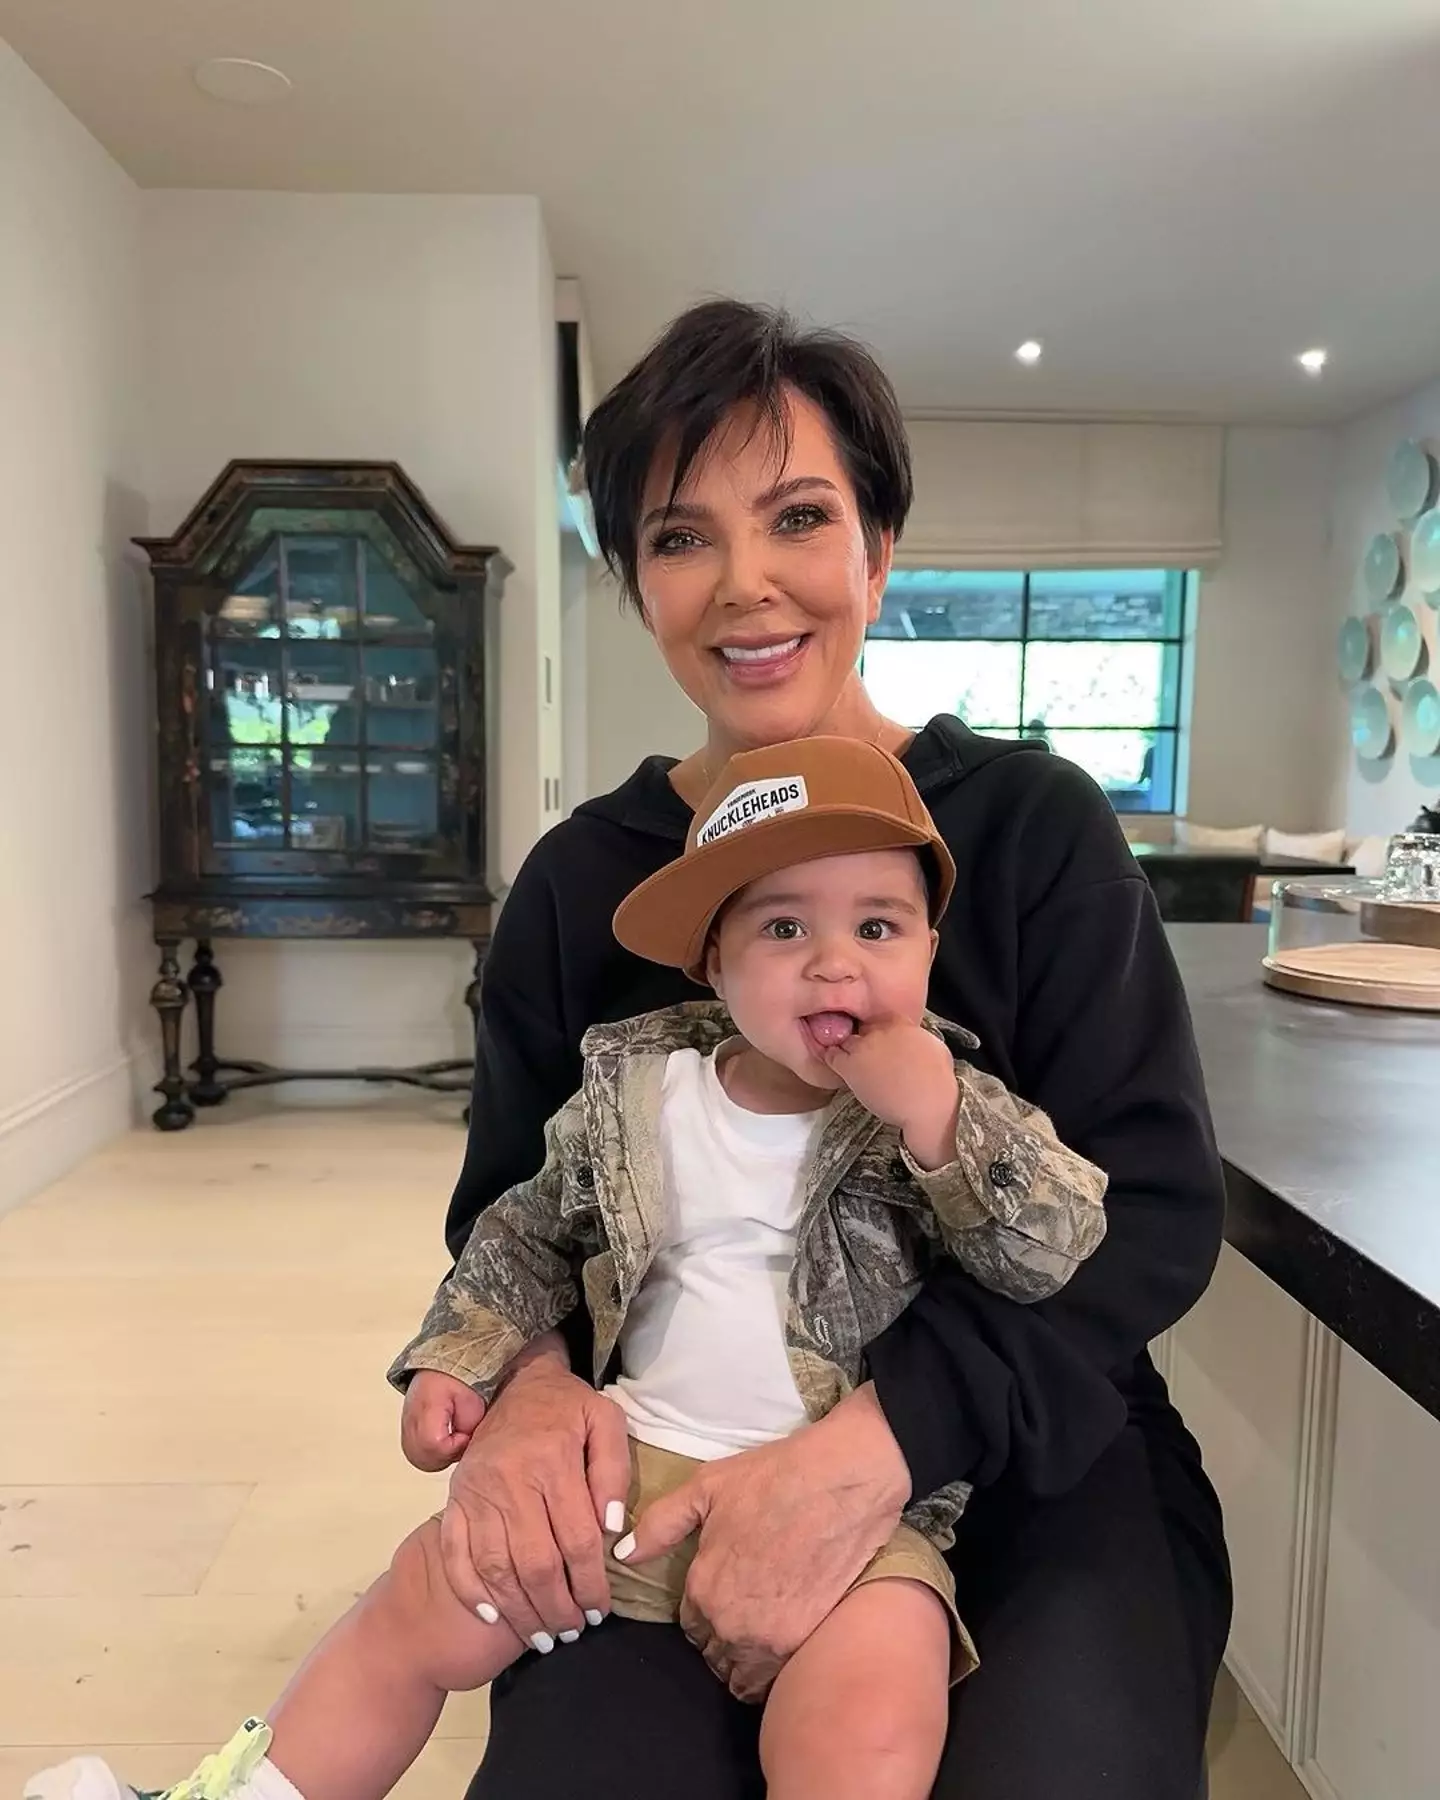 Kris Jenner compared her grandson to her late husband, Robert.